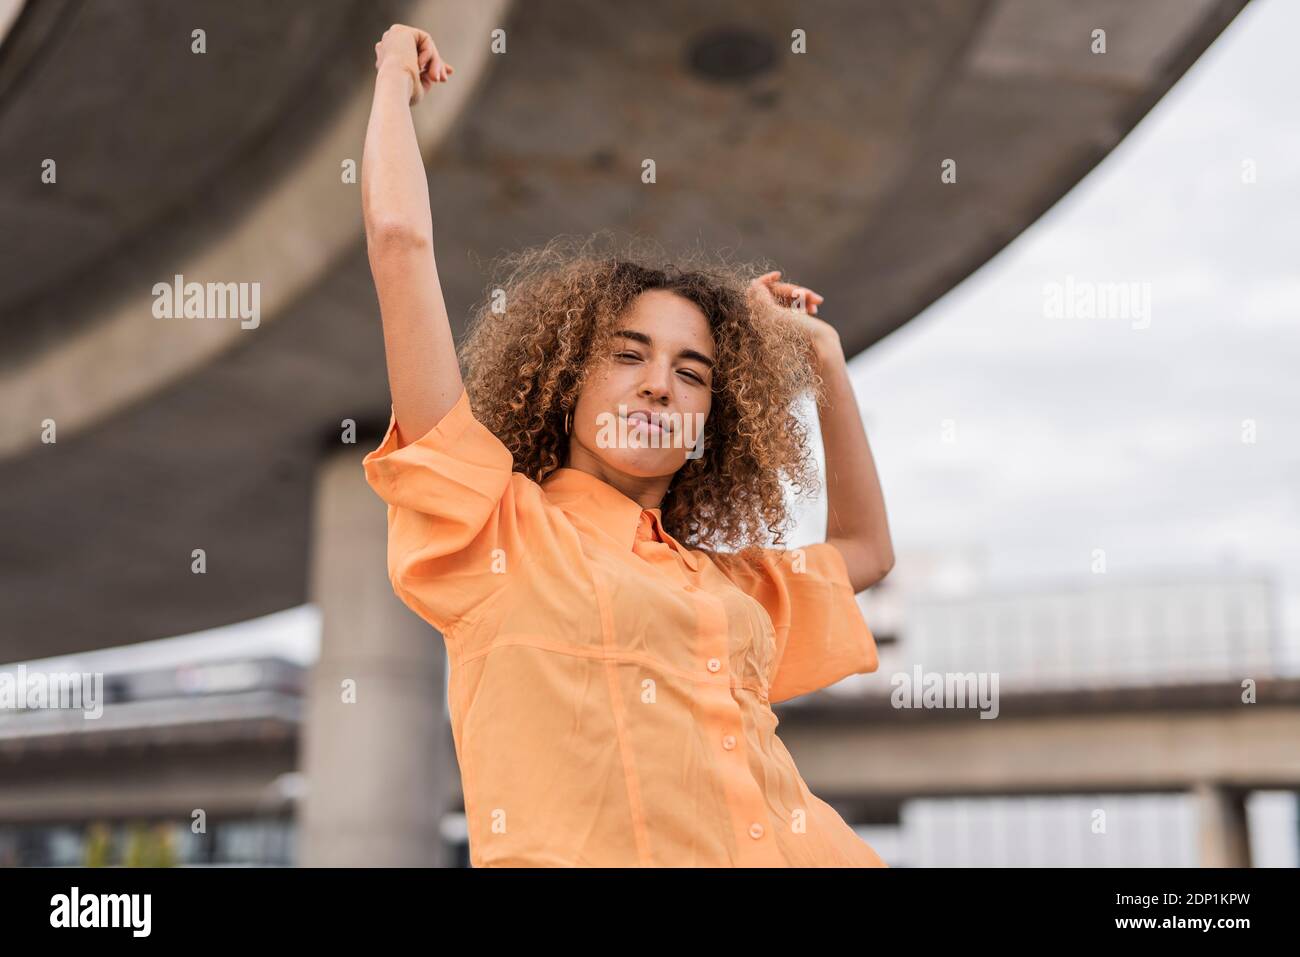 Woman with arms raised and eyes closed dancing while standing outdoors Stock Photo